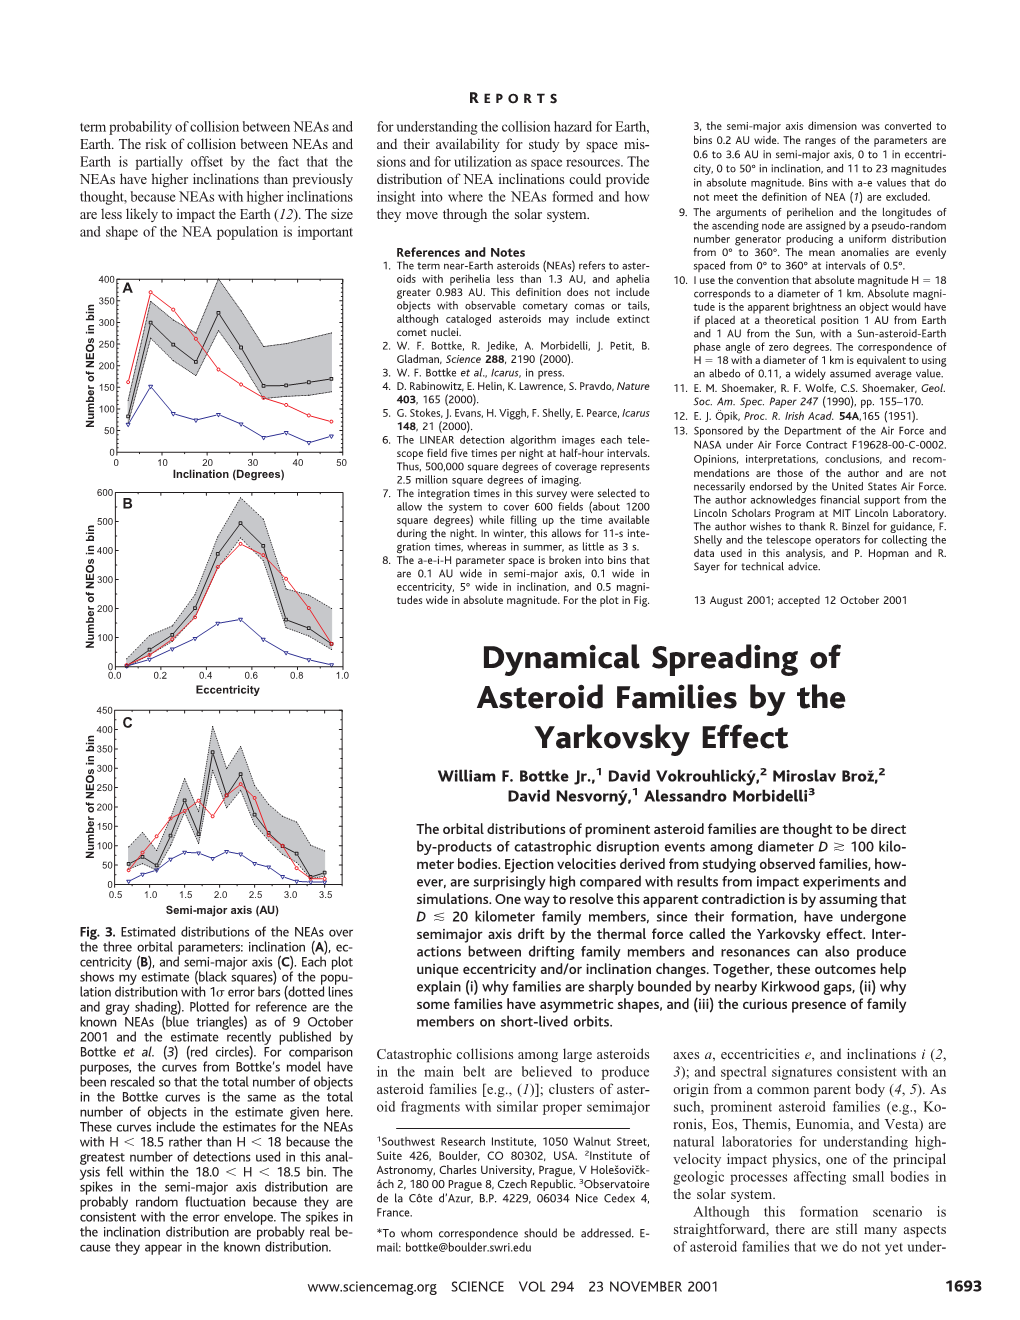 Dynamical Spreading of Asteroid Families by the Yarkovsky Effect